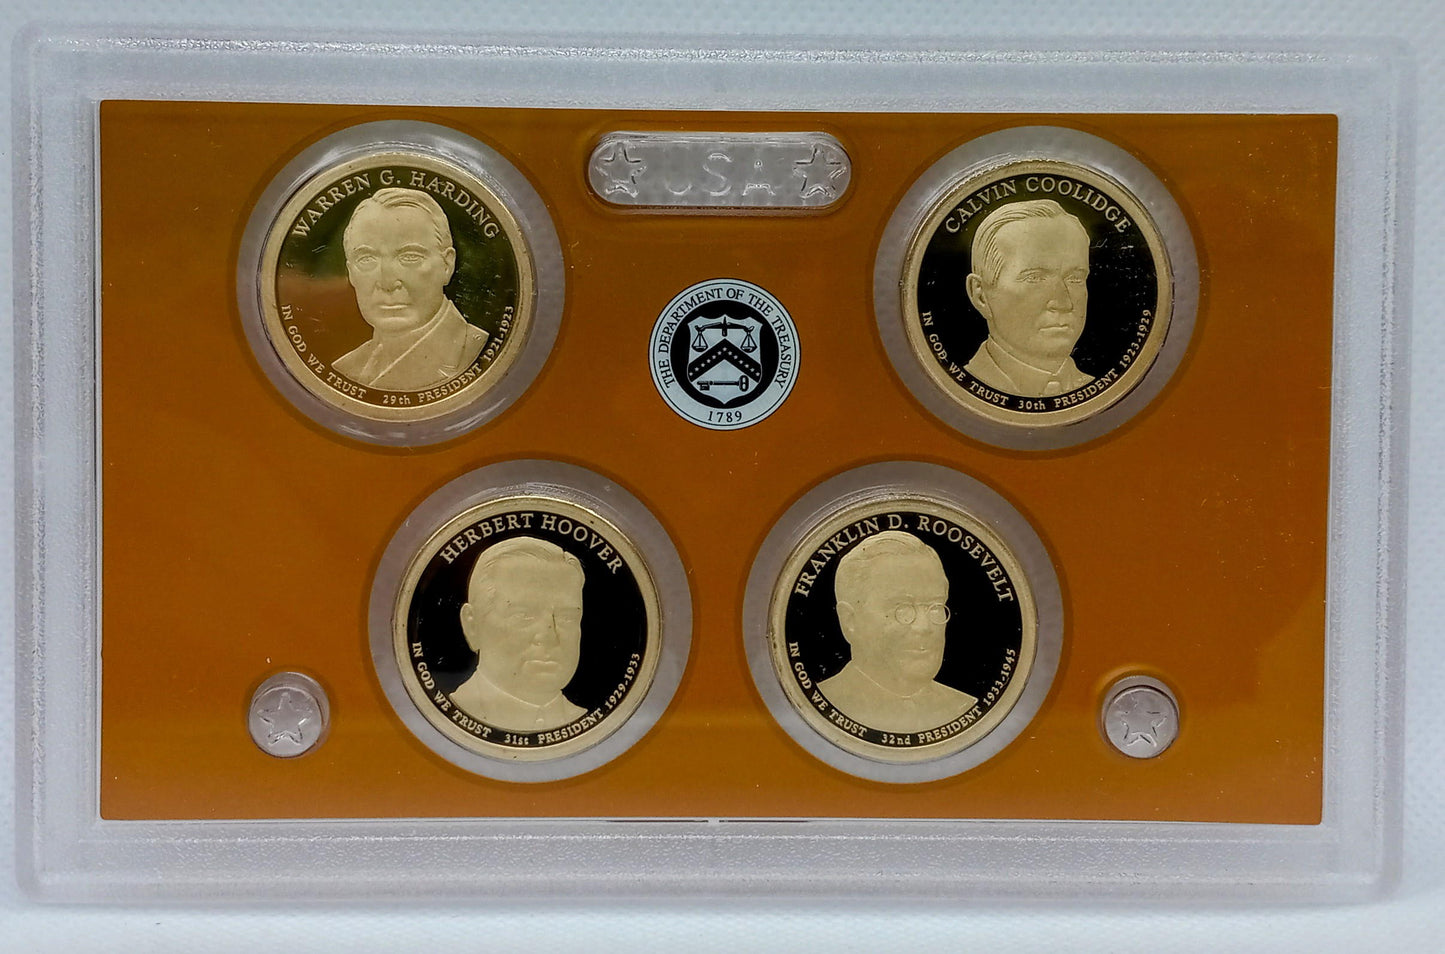 2014 United States Mint PRESIDENTIAL DOLLAR COIN PROOF SET With OGP & COA!